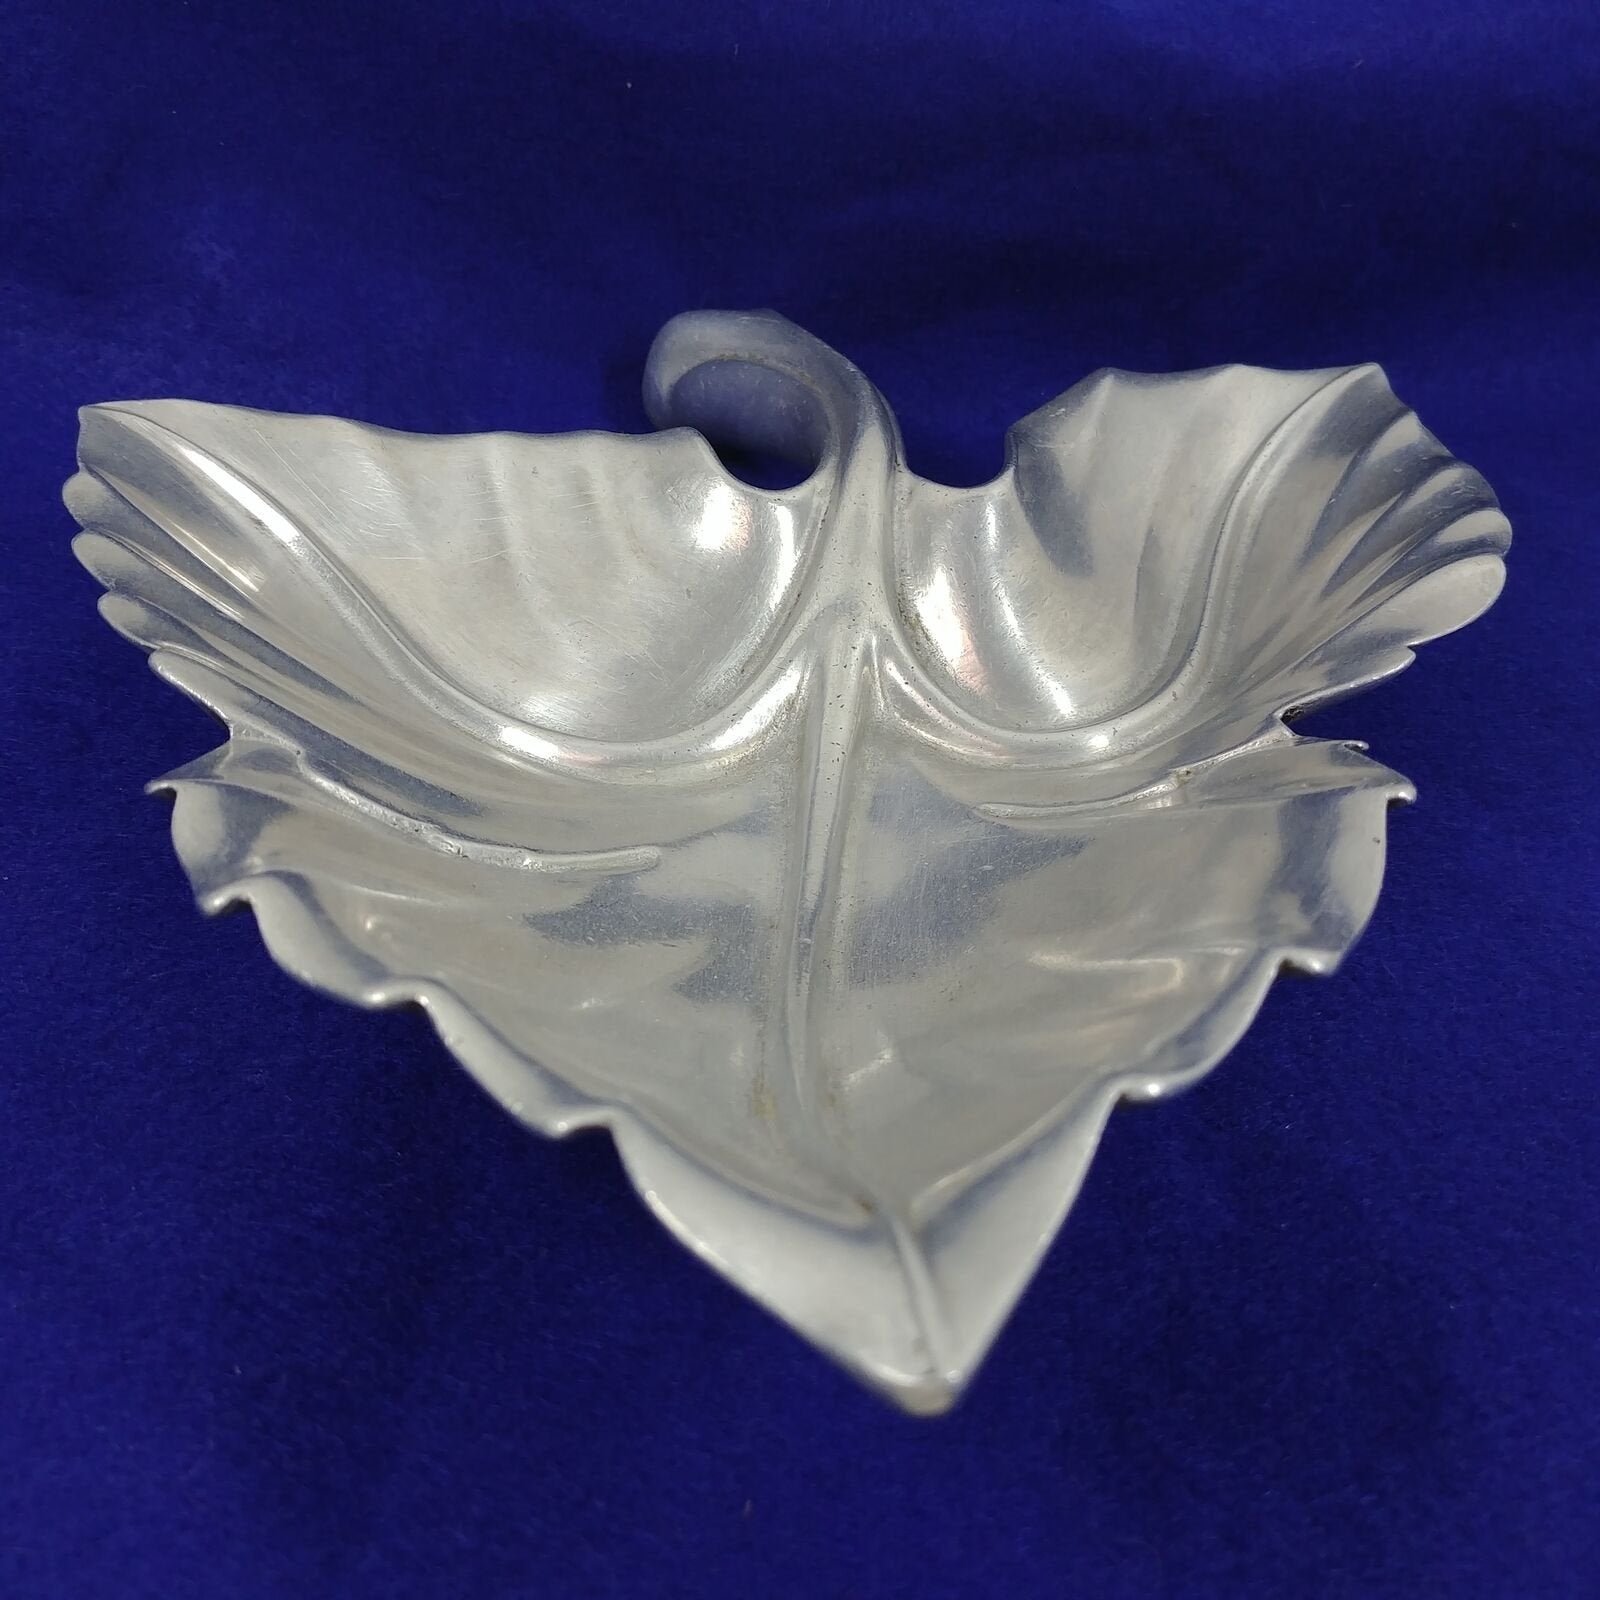 Bruce Cox Aluminum 12" Leaf Shaped Tray Signed and Numbered